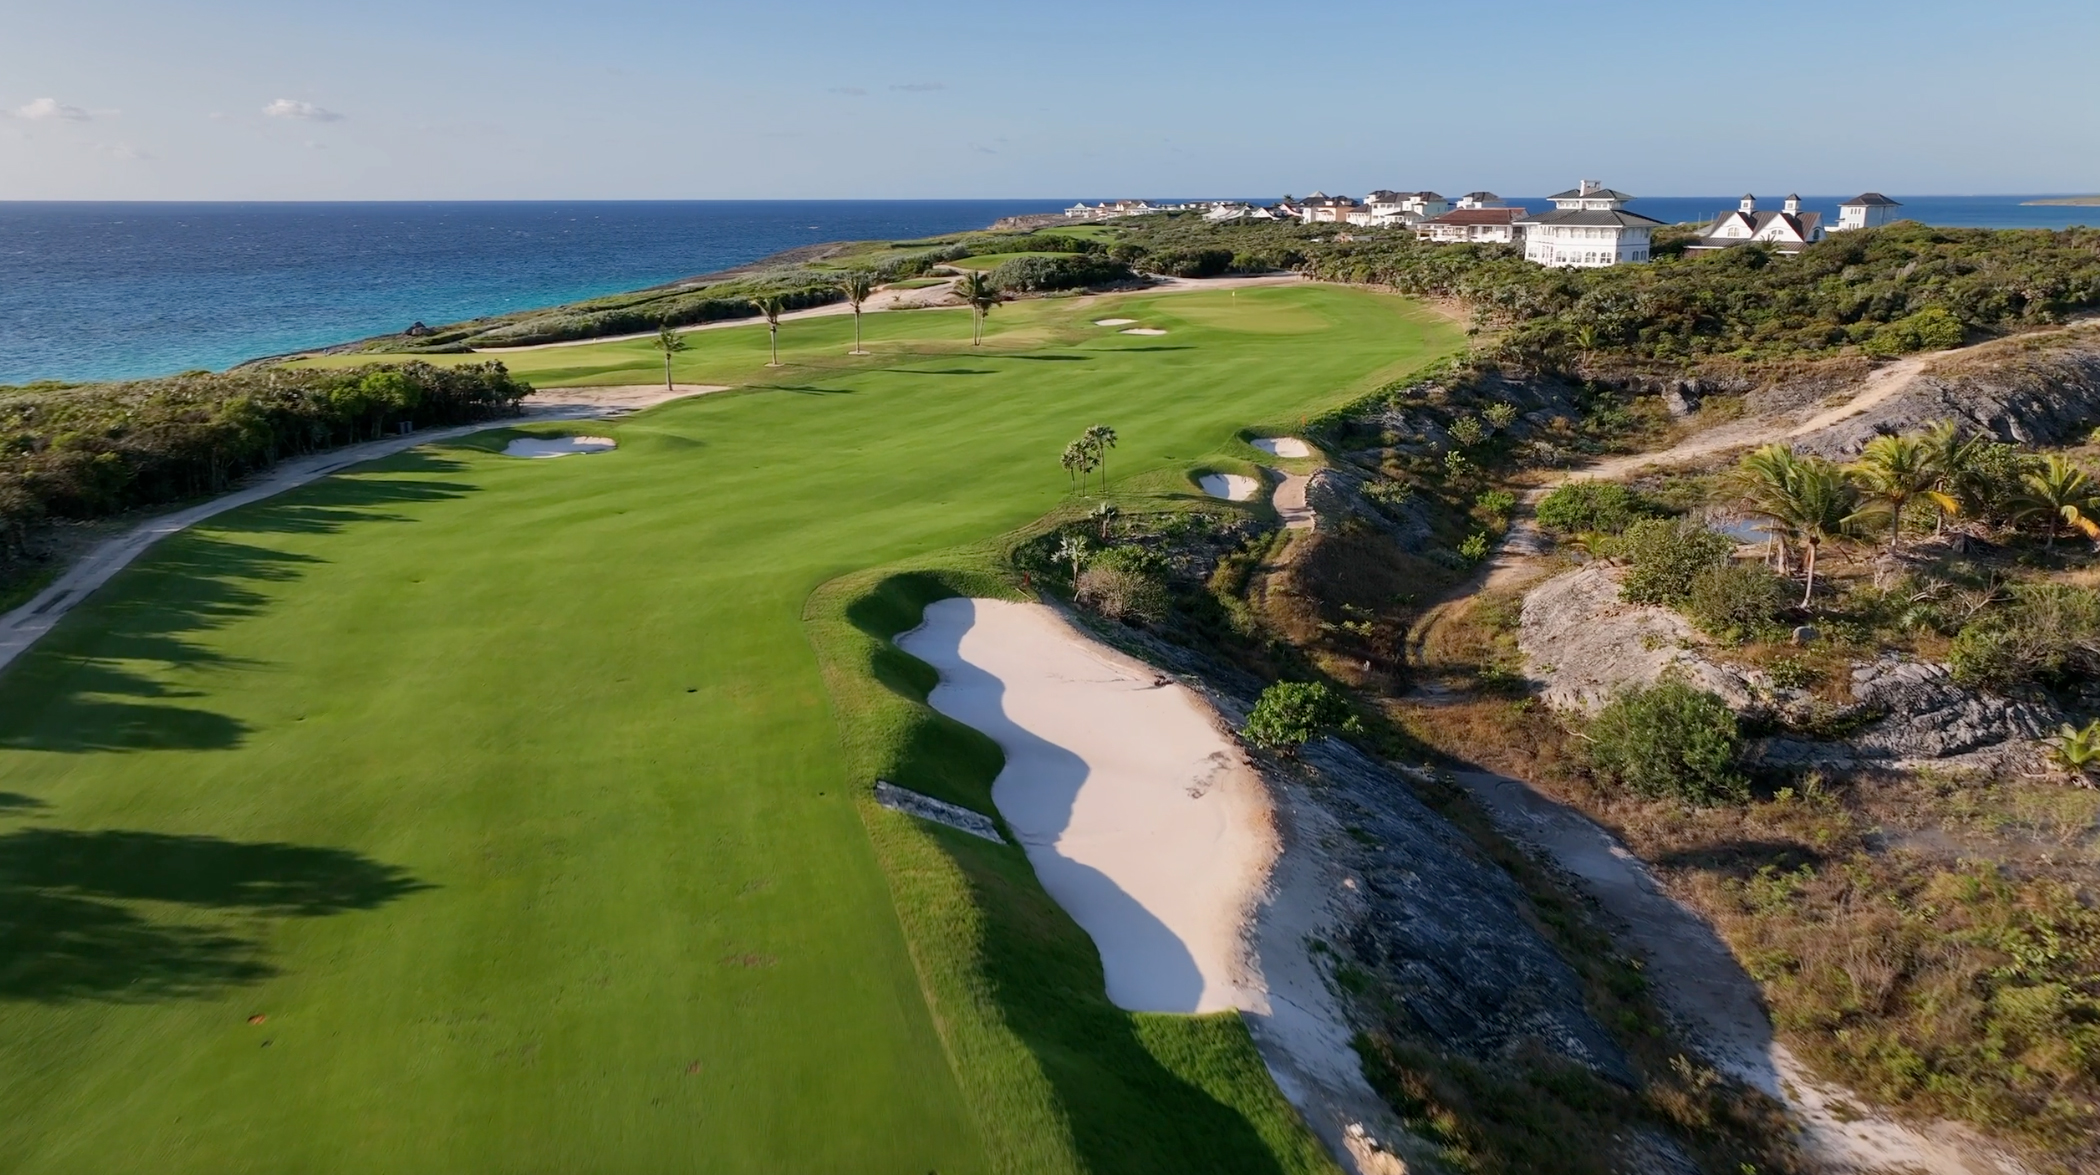 Aerial shot of Hole 16 from The Abaco Club golf course